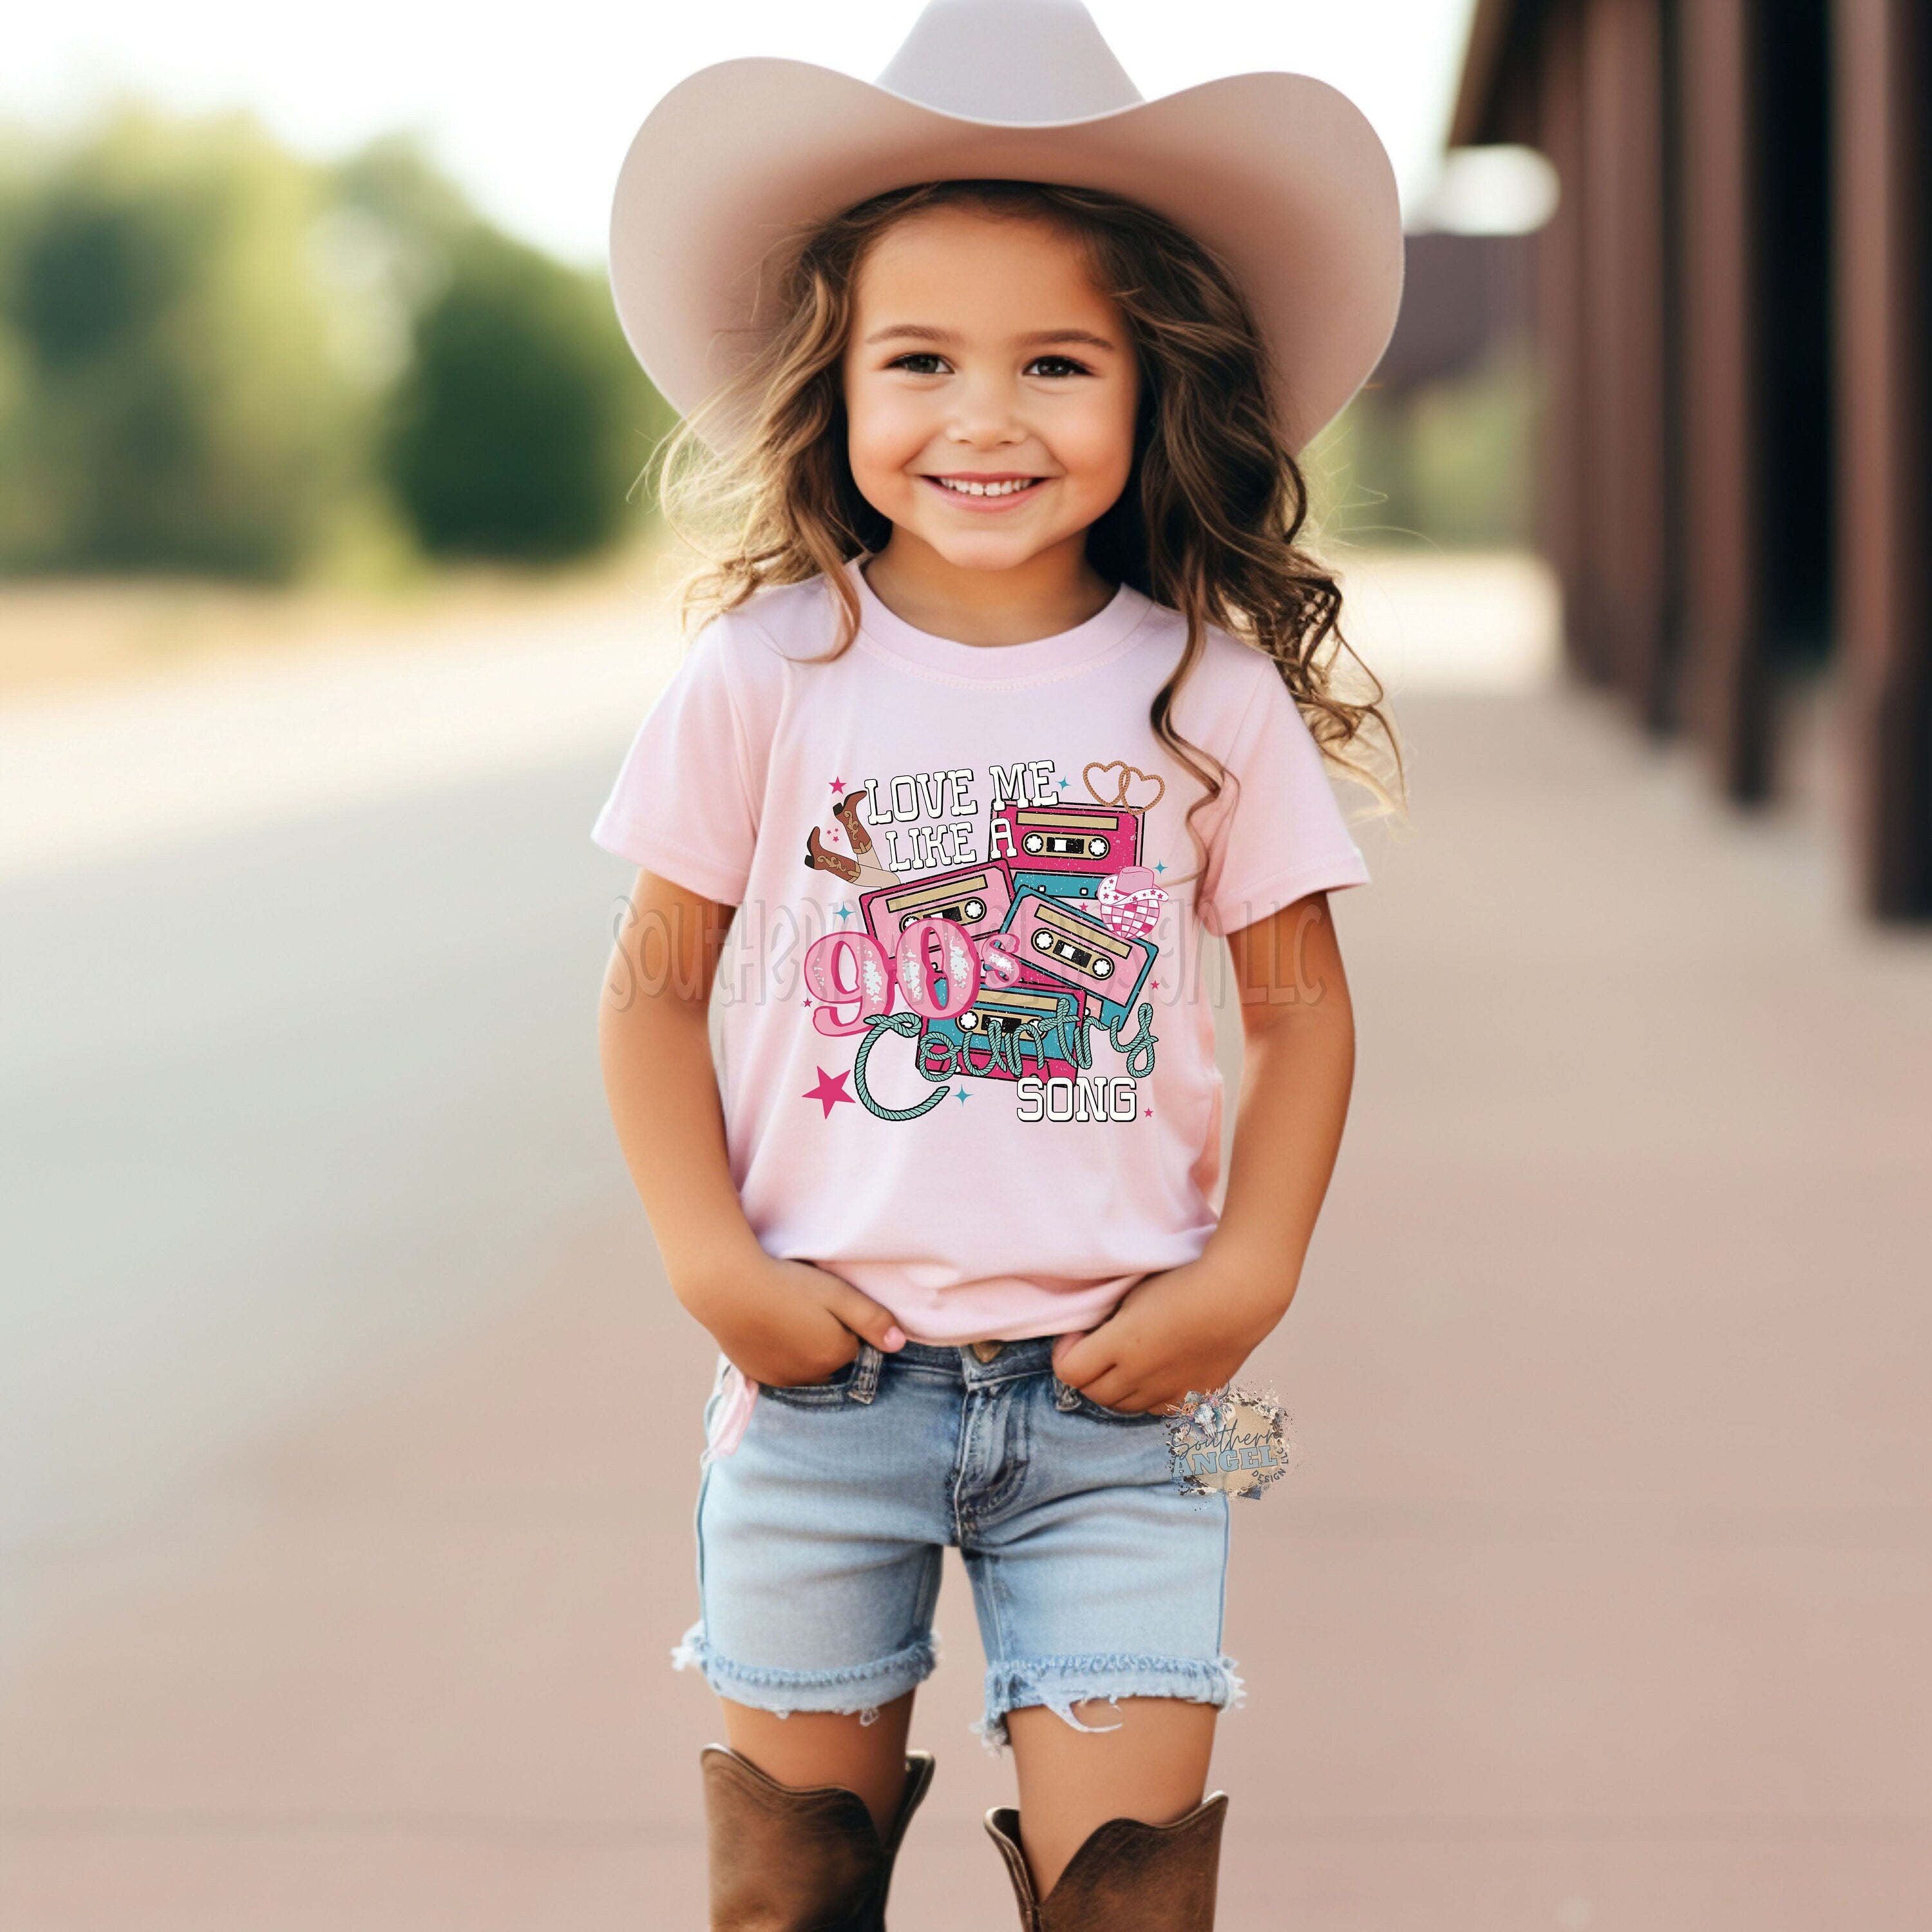 Country girl shirt, Love me like a country song shirt, kids country music shirt, Girls rodeo shirt, girls country shirt, Texas girl shirt